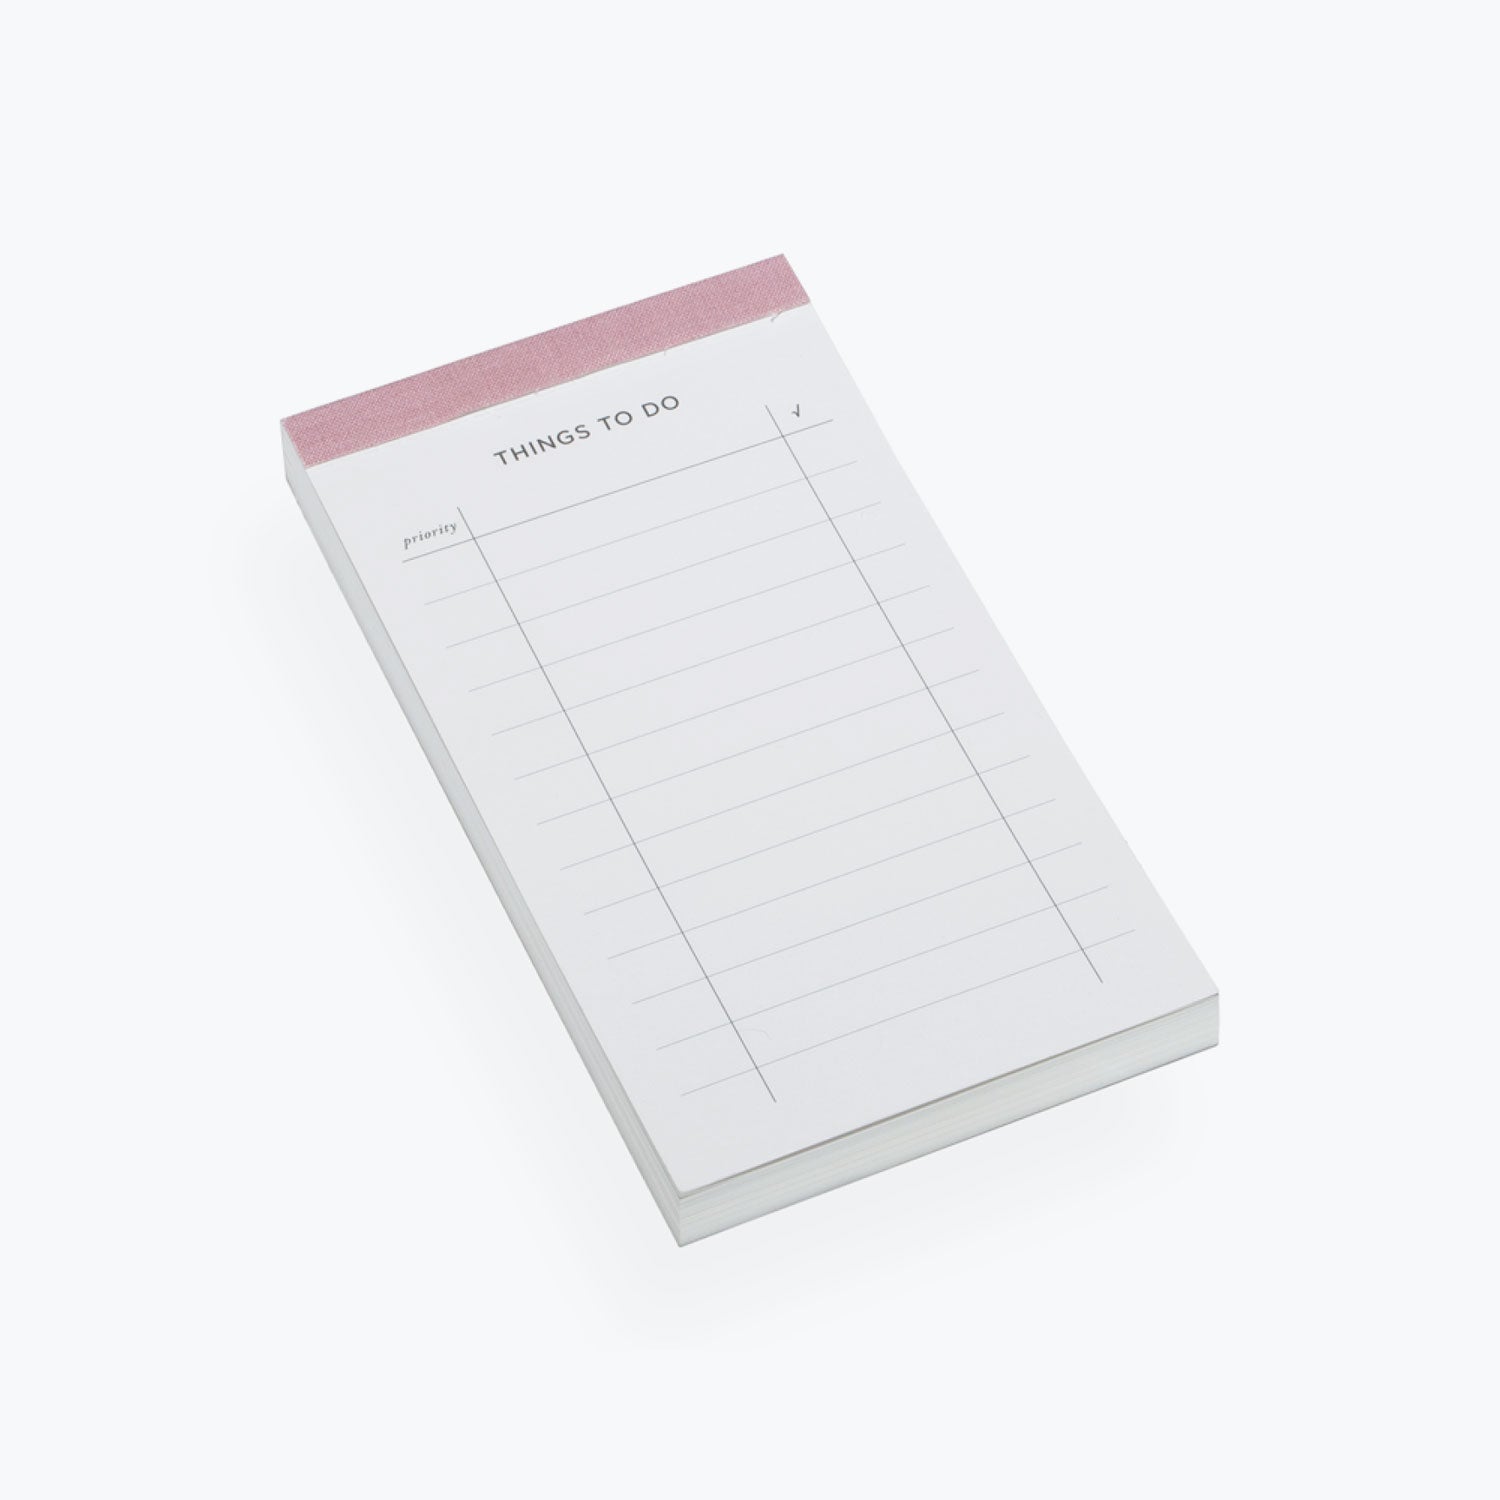 Bookbinders Design - Planner - To Do List - Dusty Pink